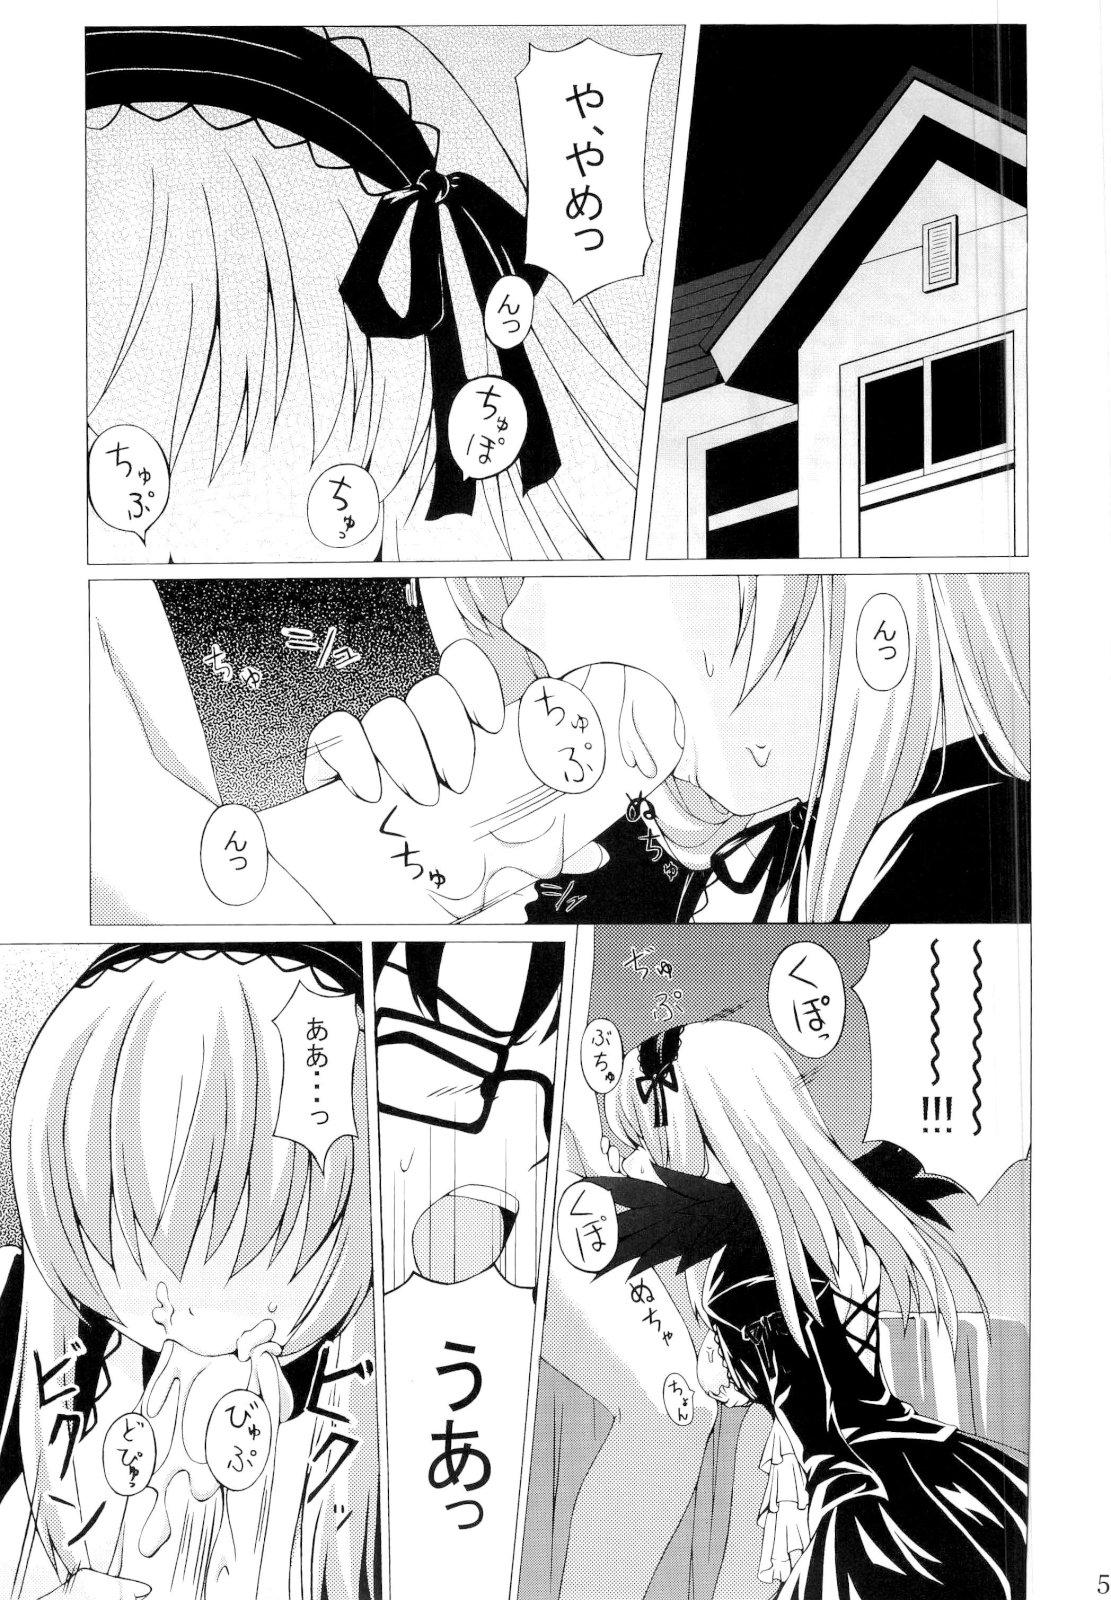 Gay 3some s-two - Rozen maiden Jerking - Page 3